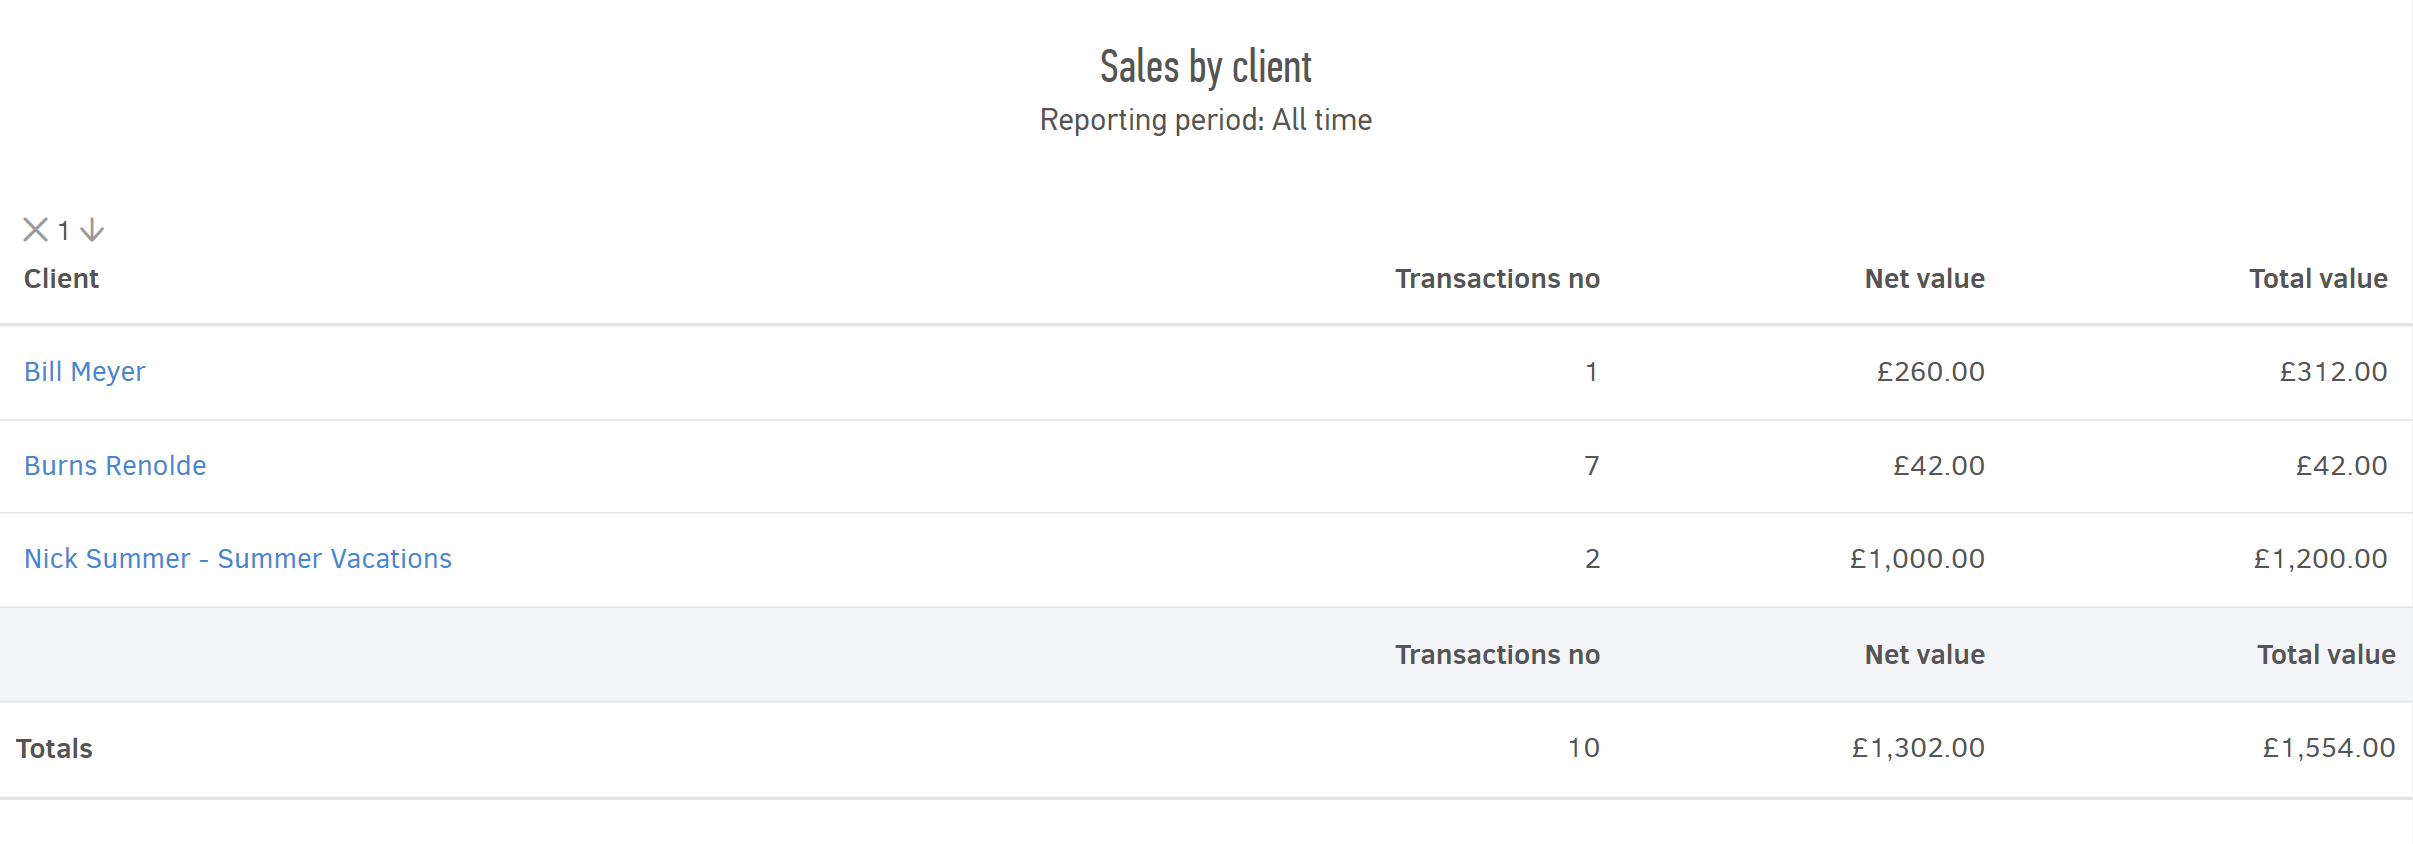 Sales by client report